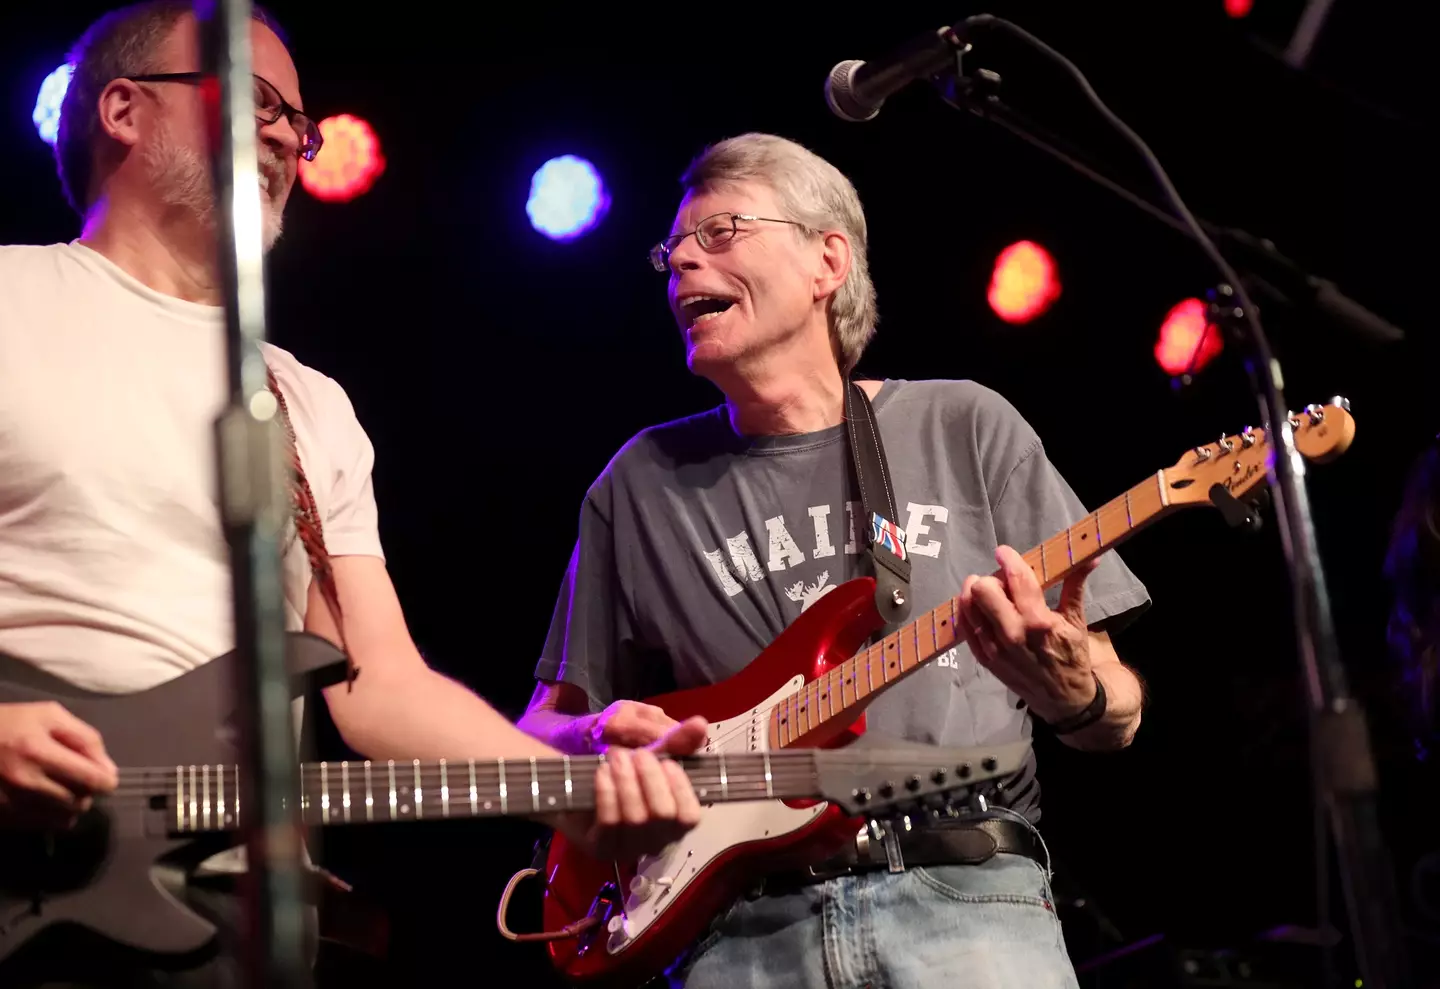 Stephen King really likes to rock out.